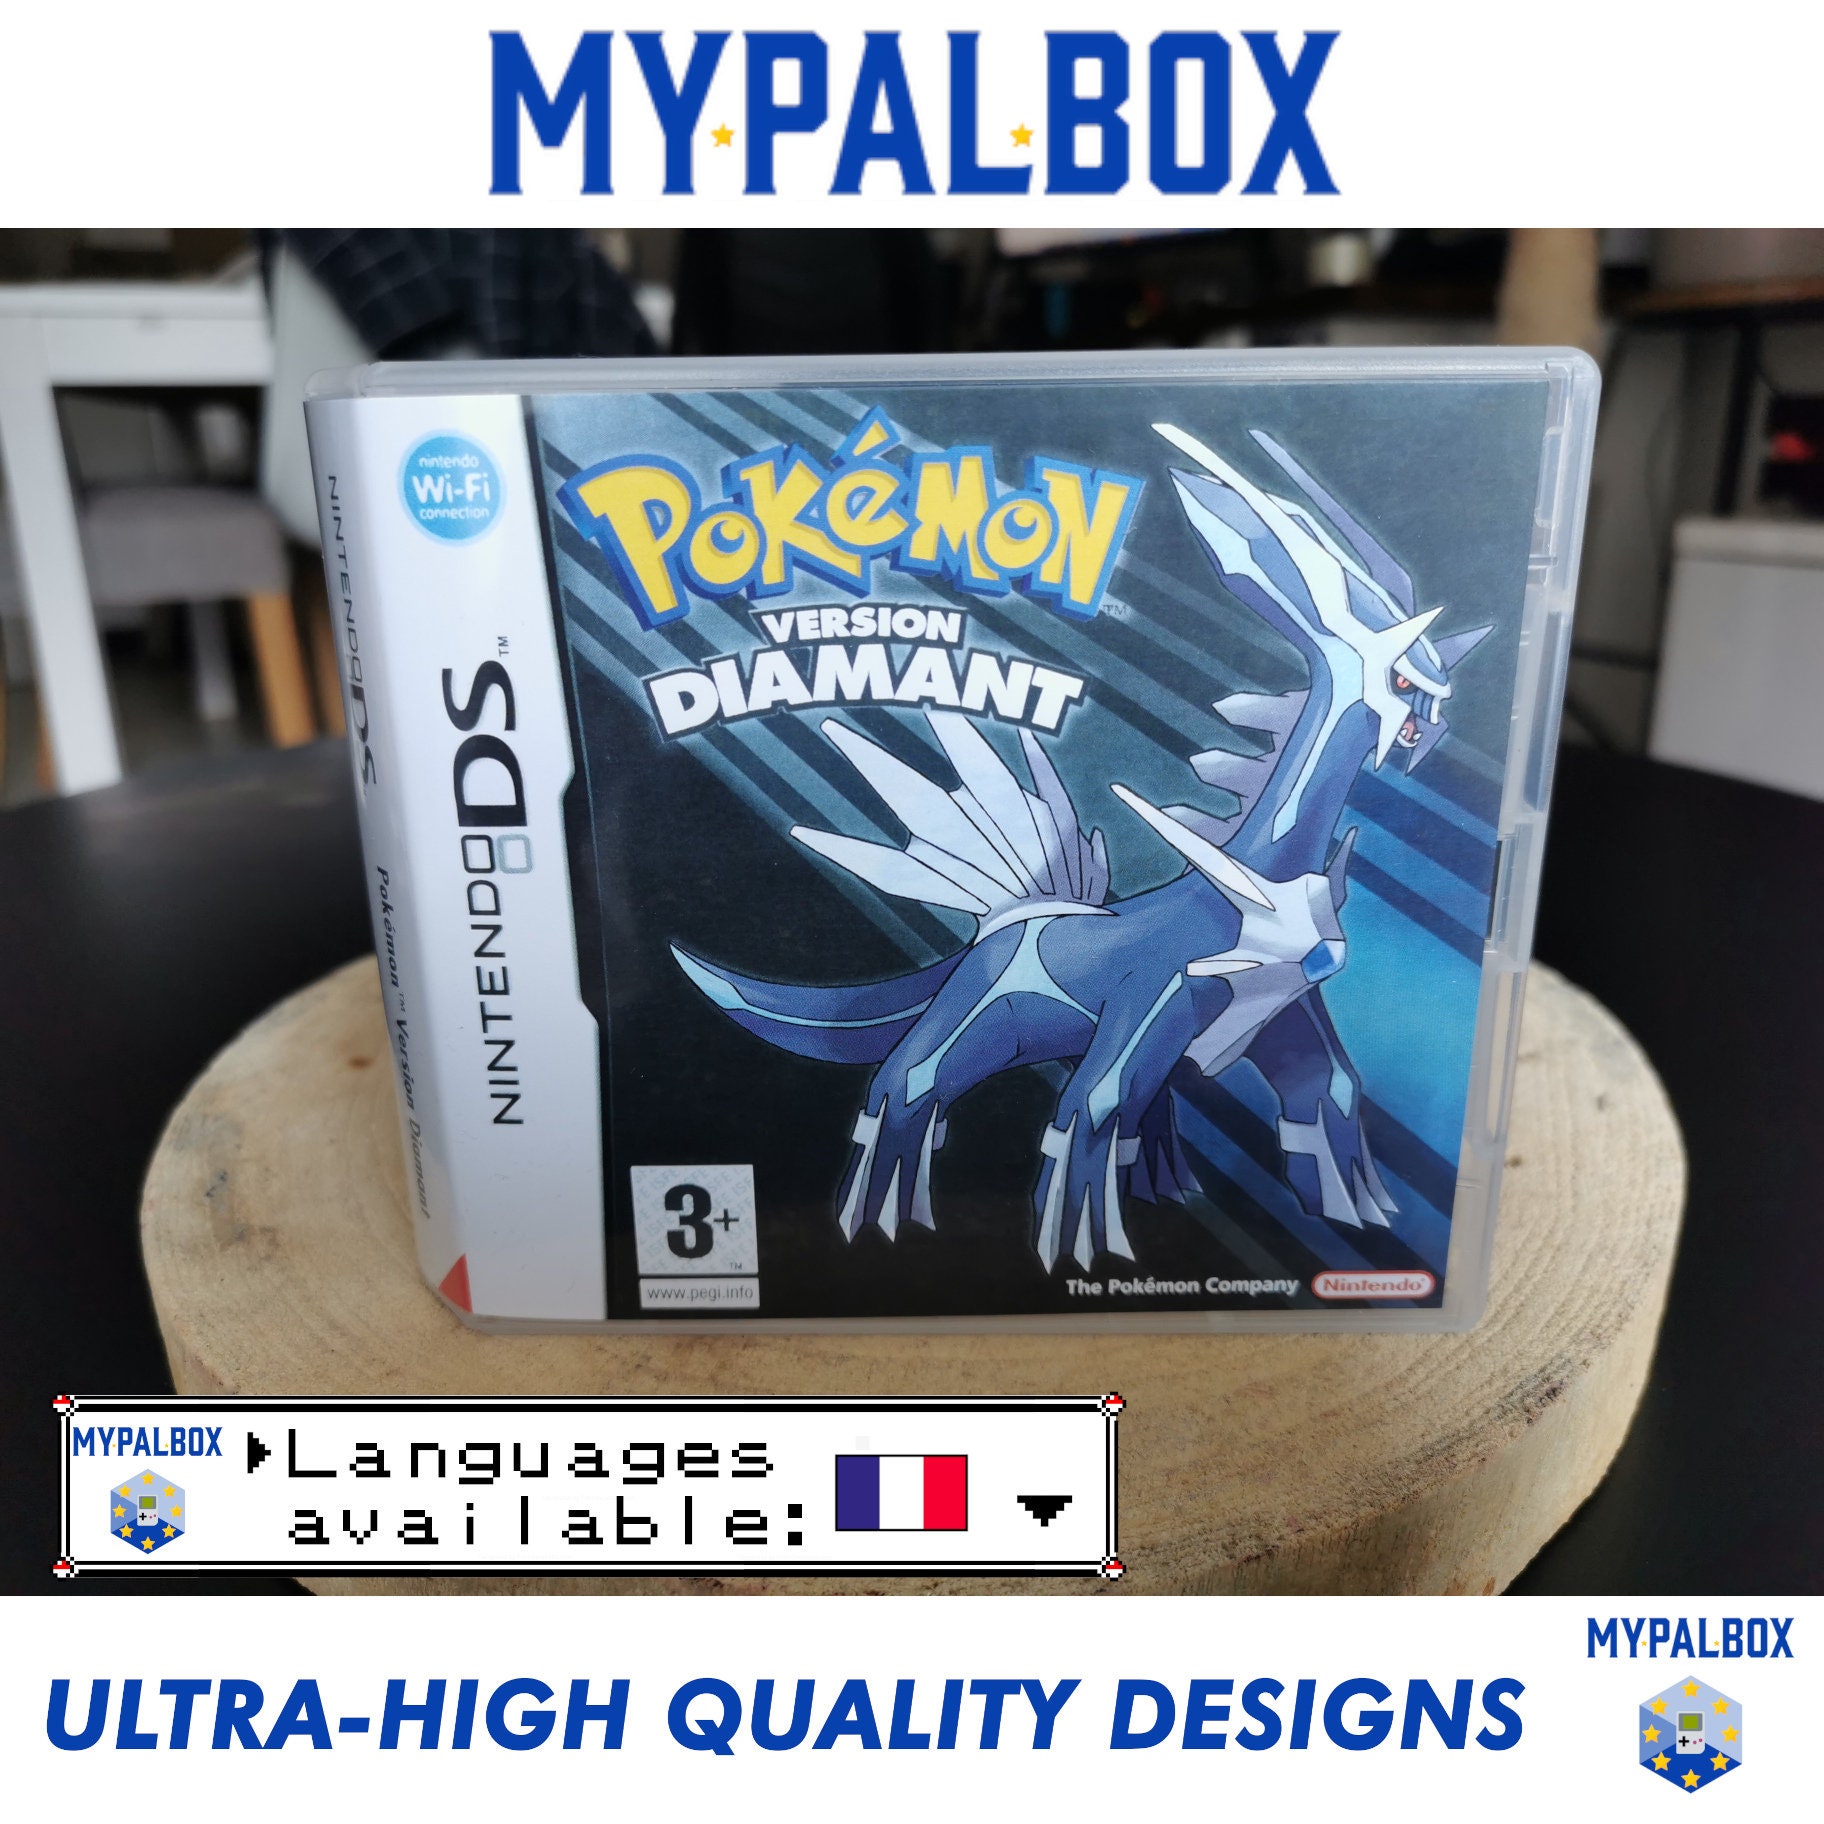 ds POKEMON GAMES GENUINE (Every DS Pokémon Release) PAL - Make Your  Selection